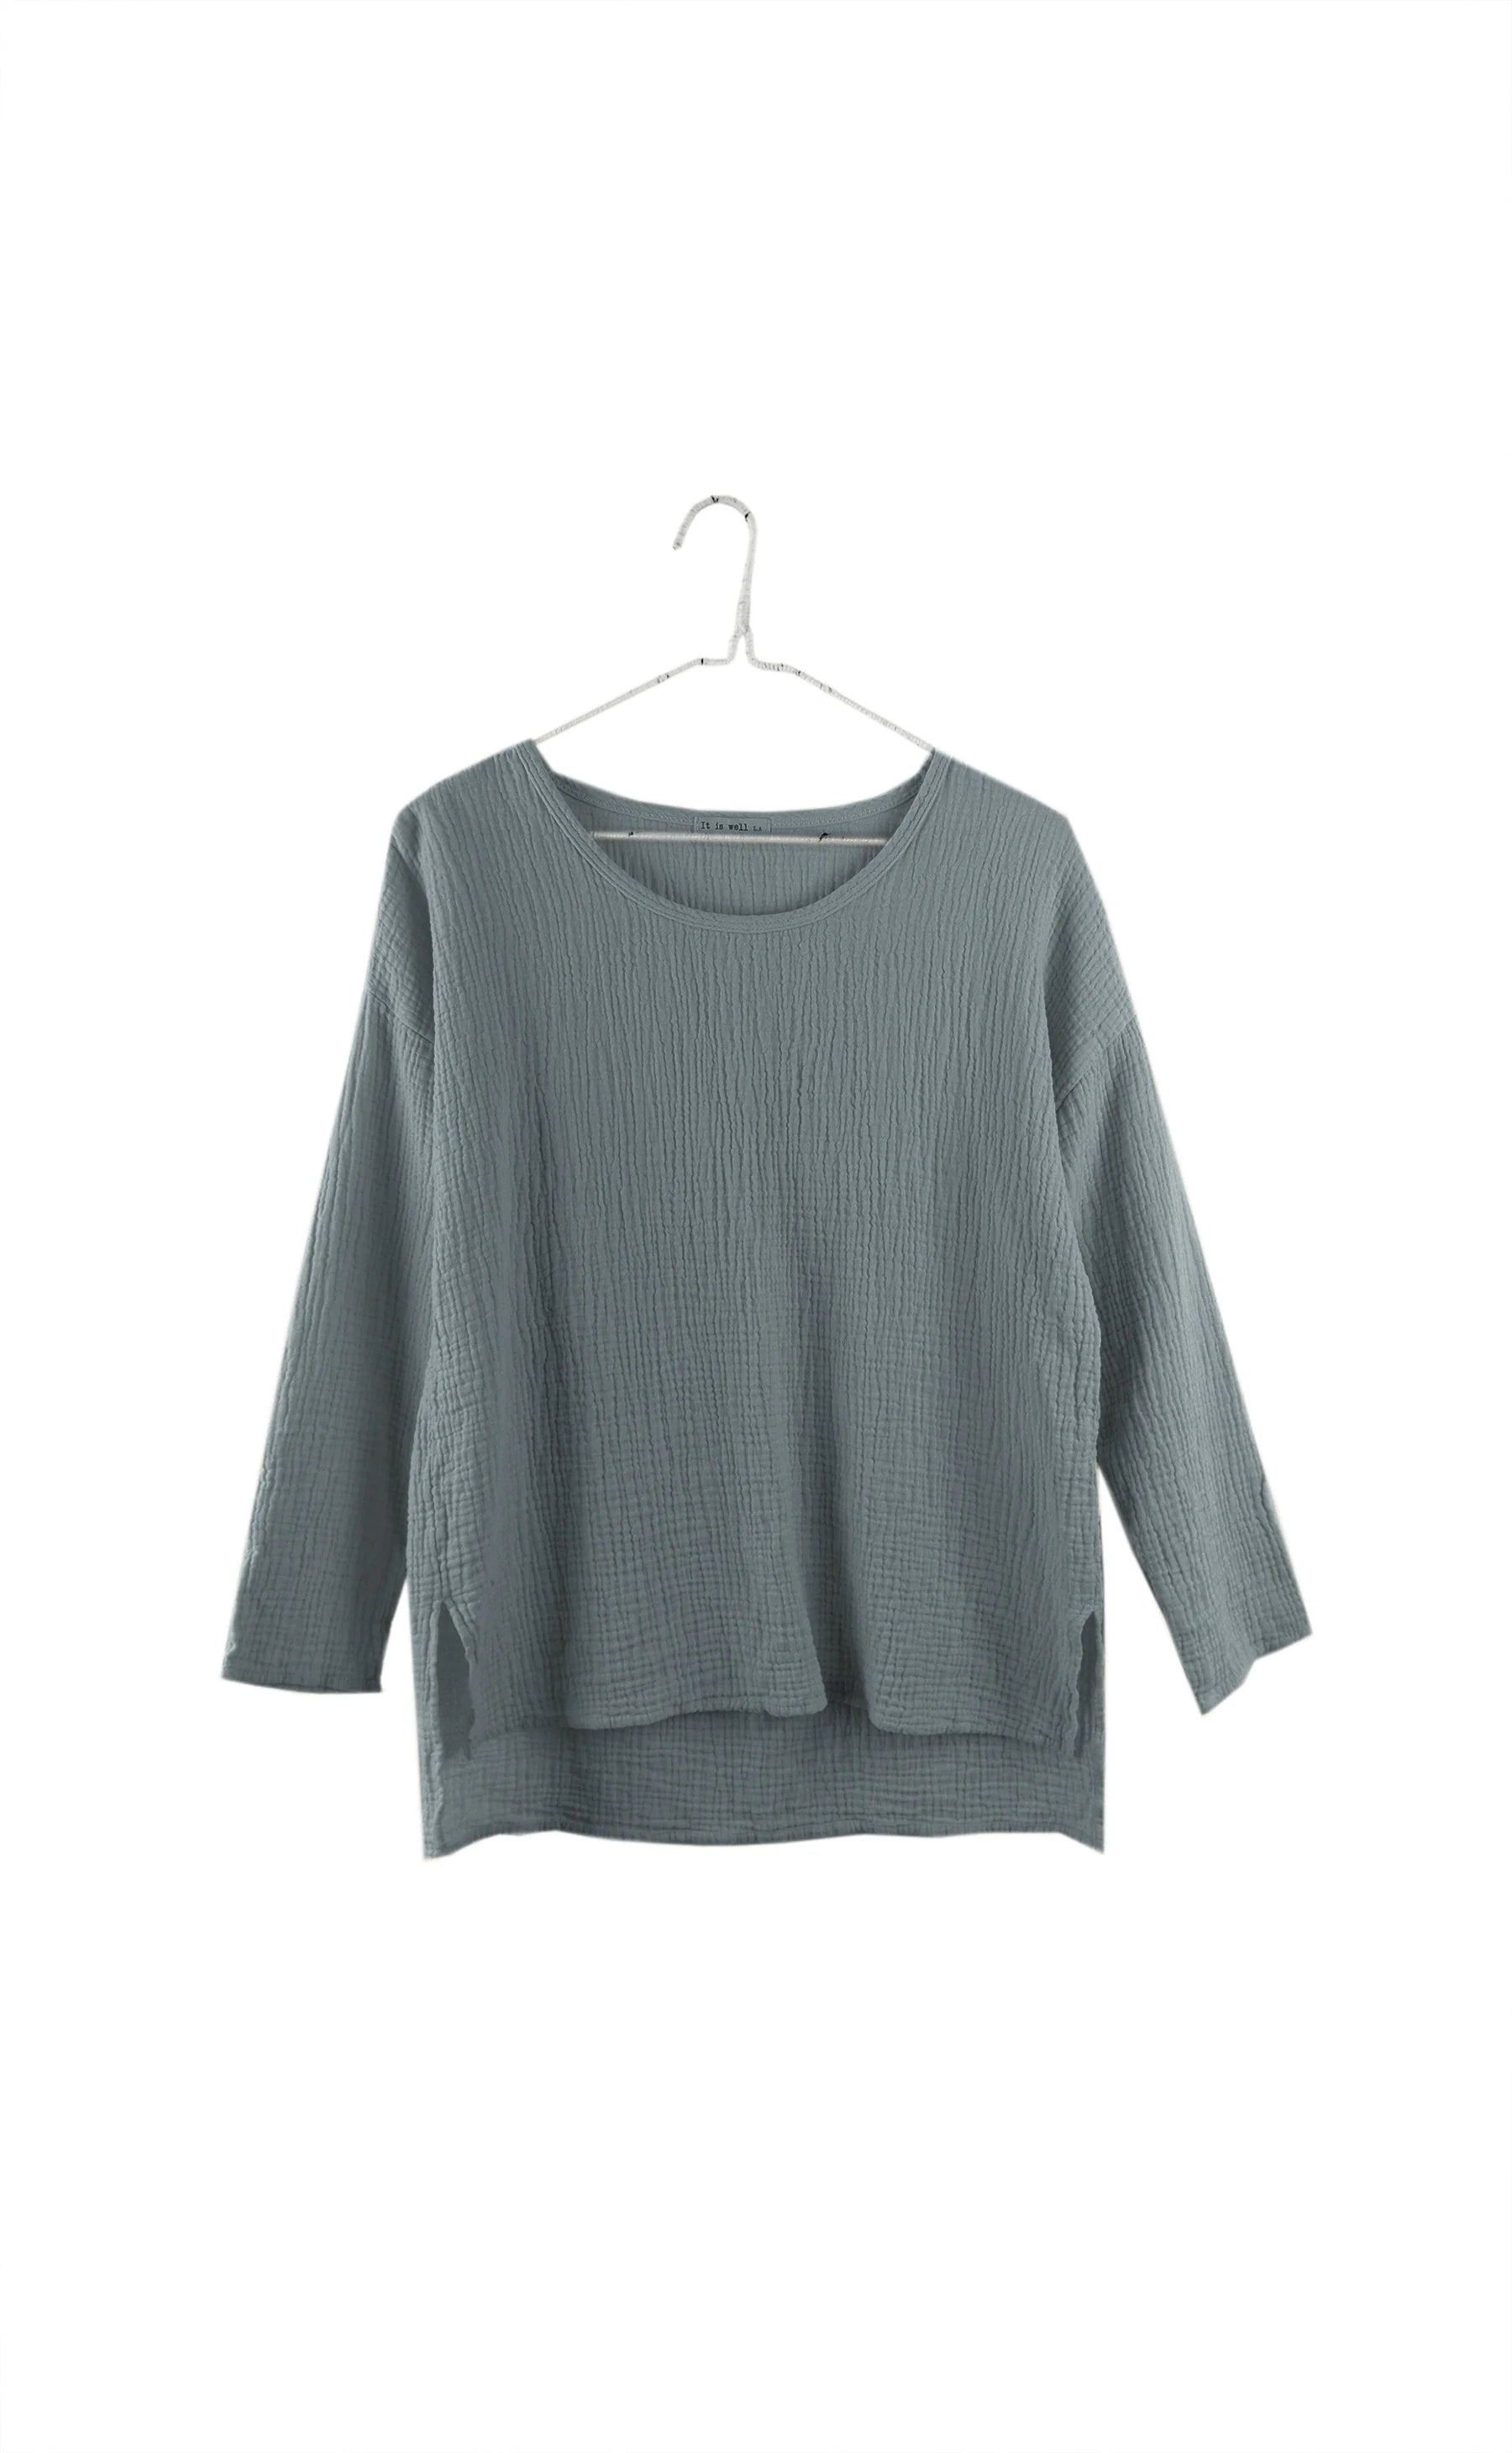 It Is Well LA - Elevated Ethical Basics Made in USA - Organic Gauze Cotton Long Sleeve Hi-Lo Top - Blue Grey Cotton on Hanger